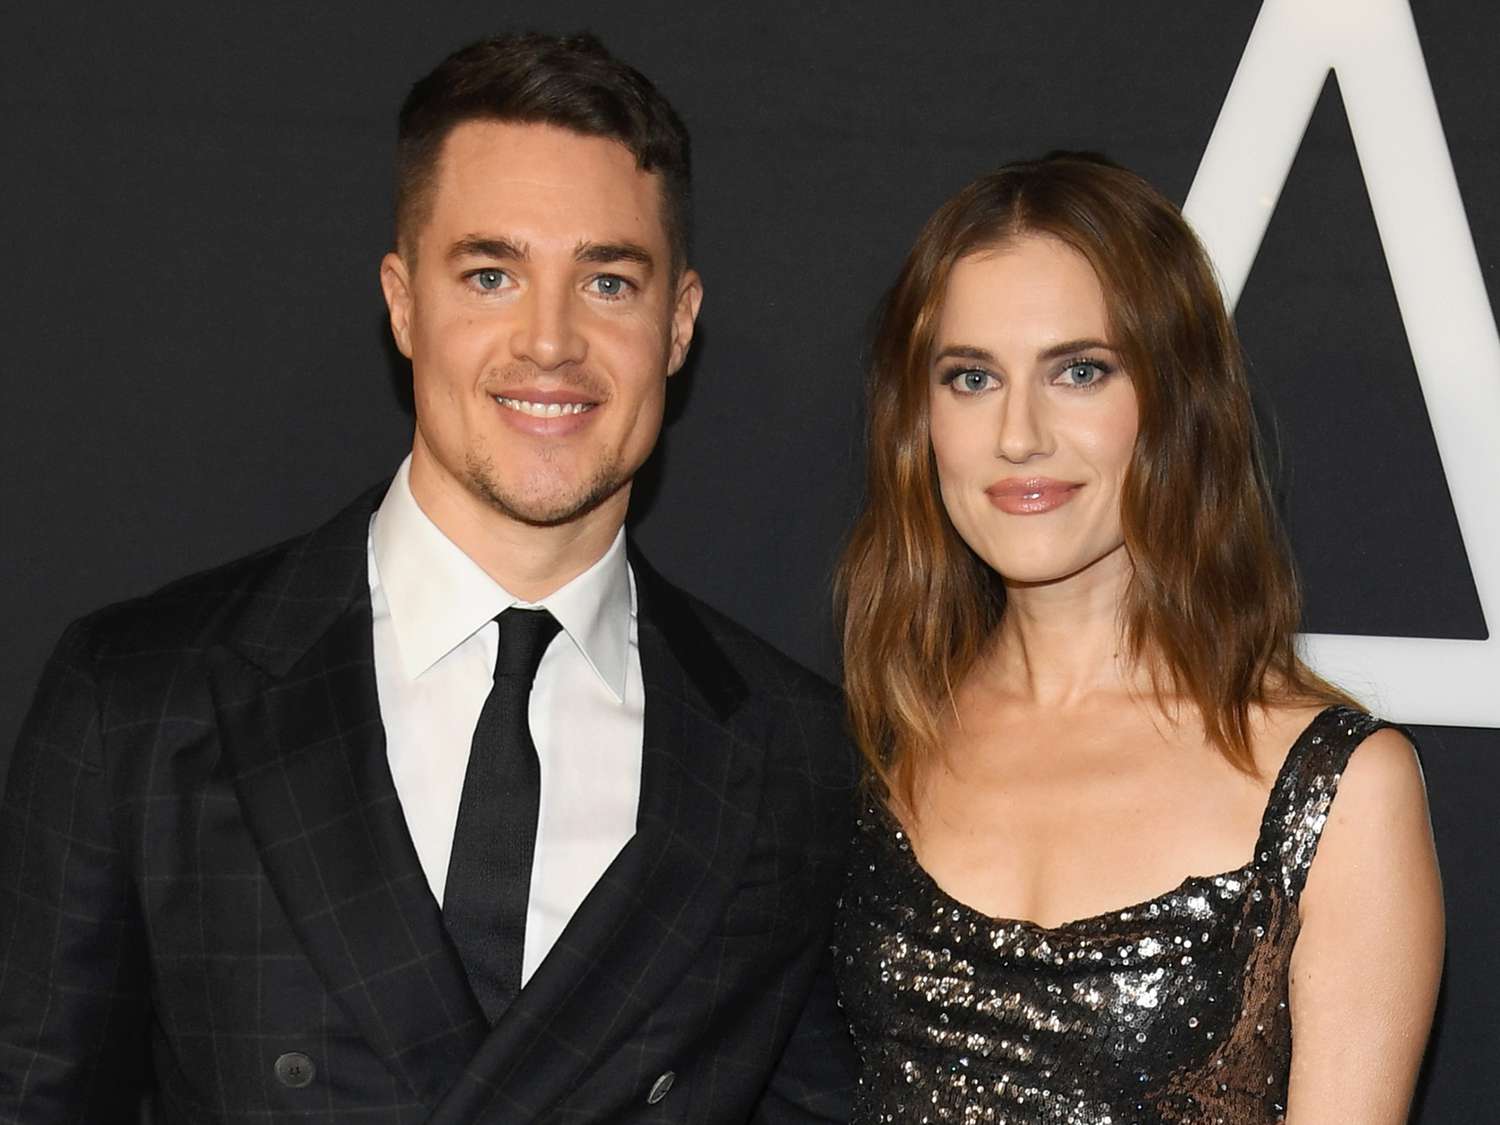 Alexander Dreymon and Allison Williams attend Los Angeles Premiere Of Universal Pictures' "M3GAN" at TCL Chinese Theatre on December 07, 2022 in Hollywood, California